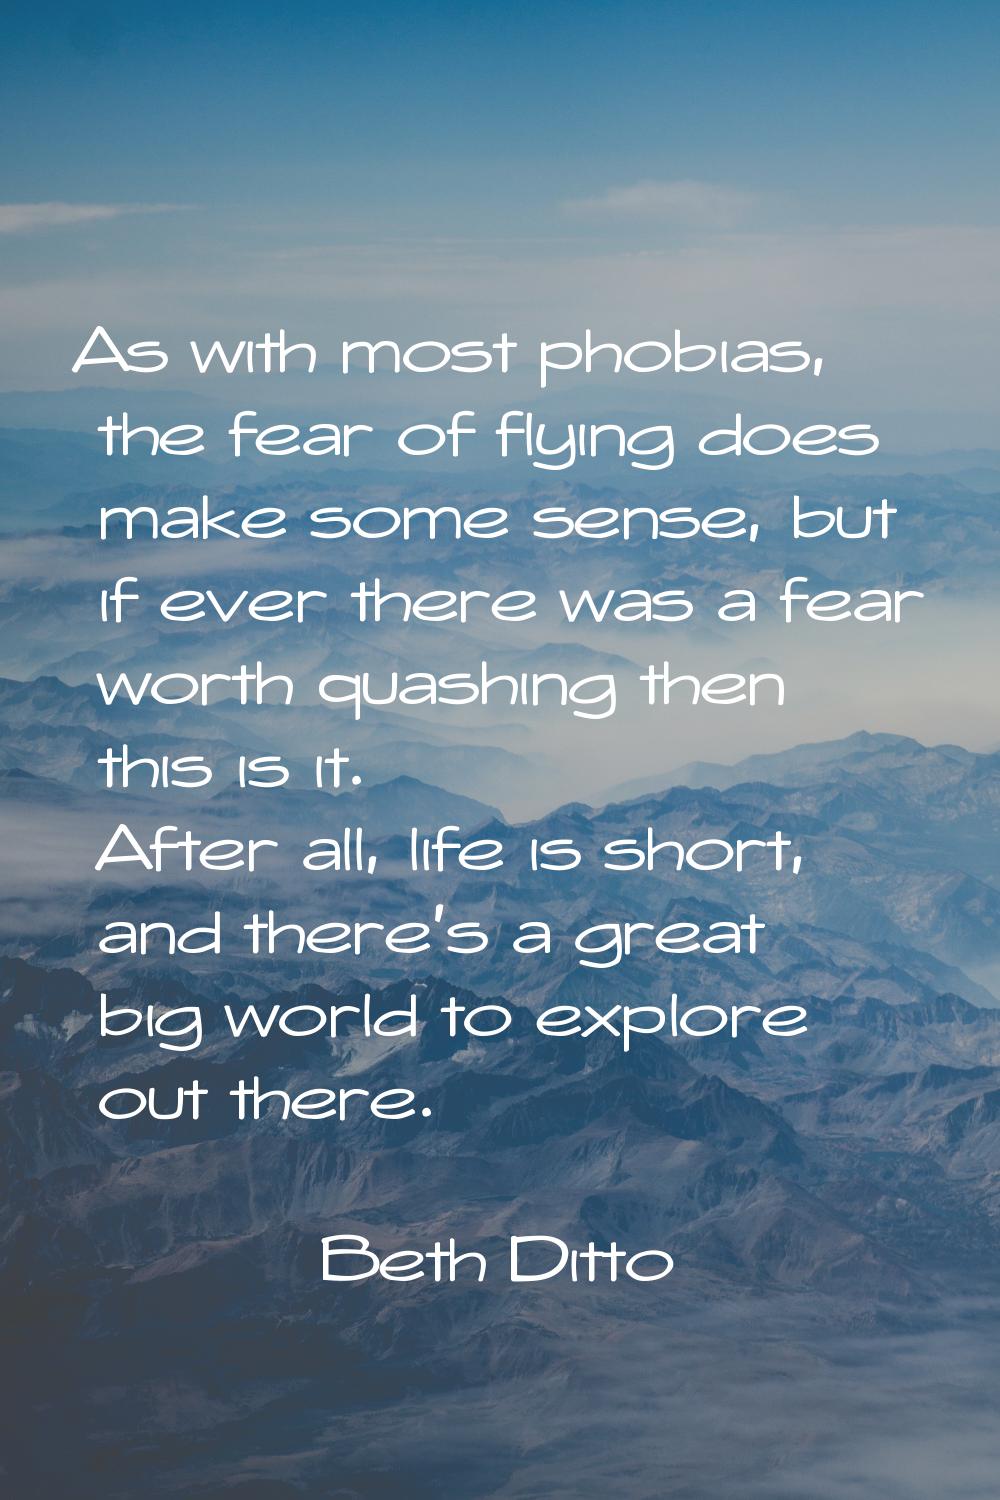 As with most phobias, the fear of flying does make some sense, but if ever there was a fear worth q